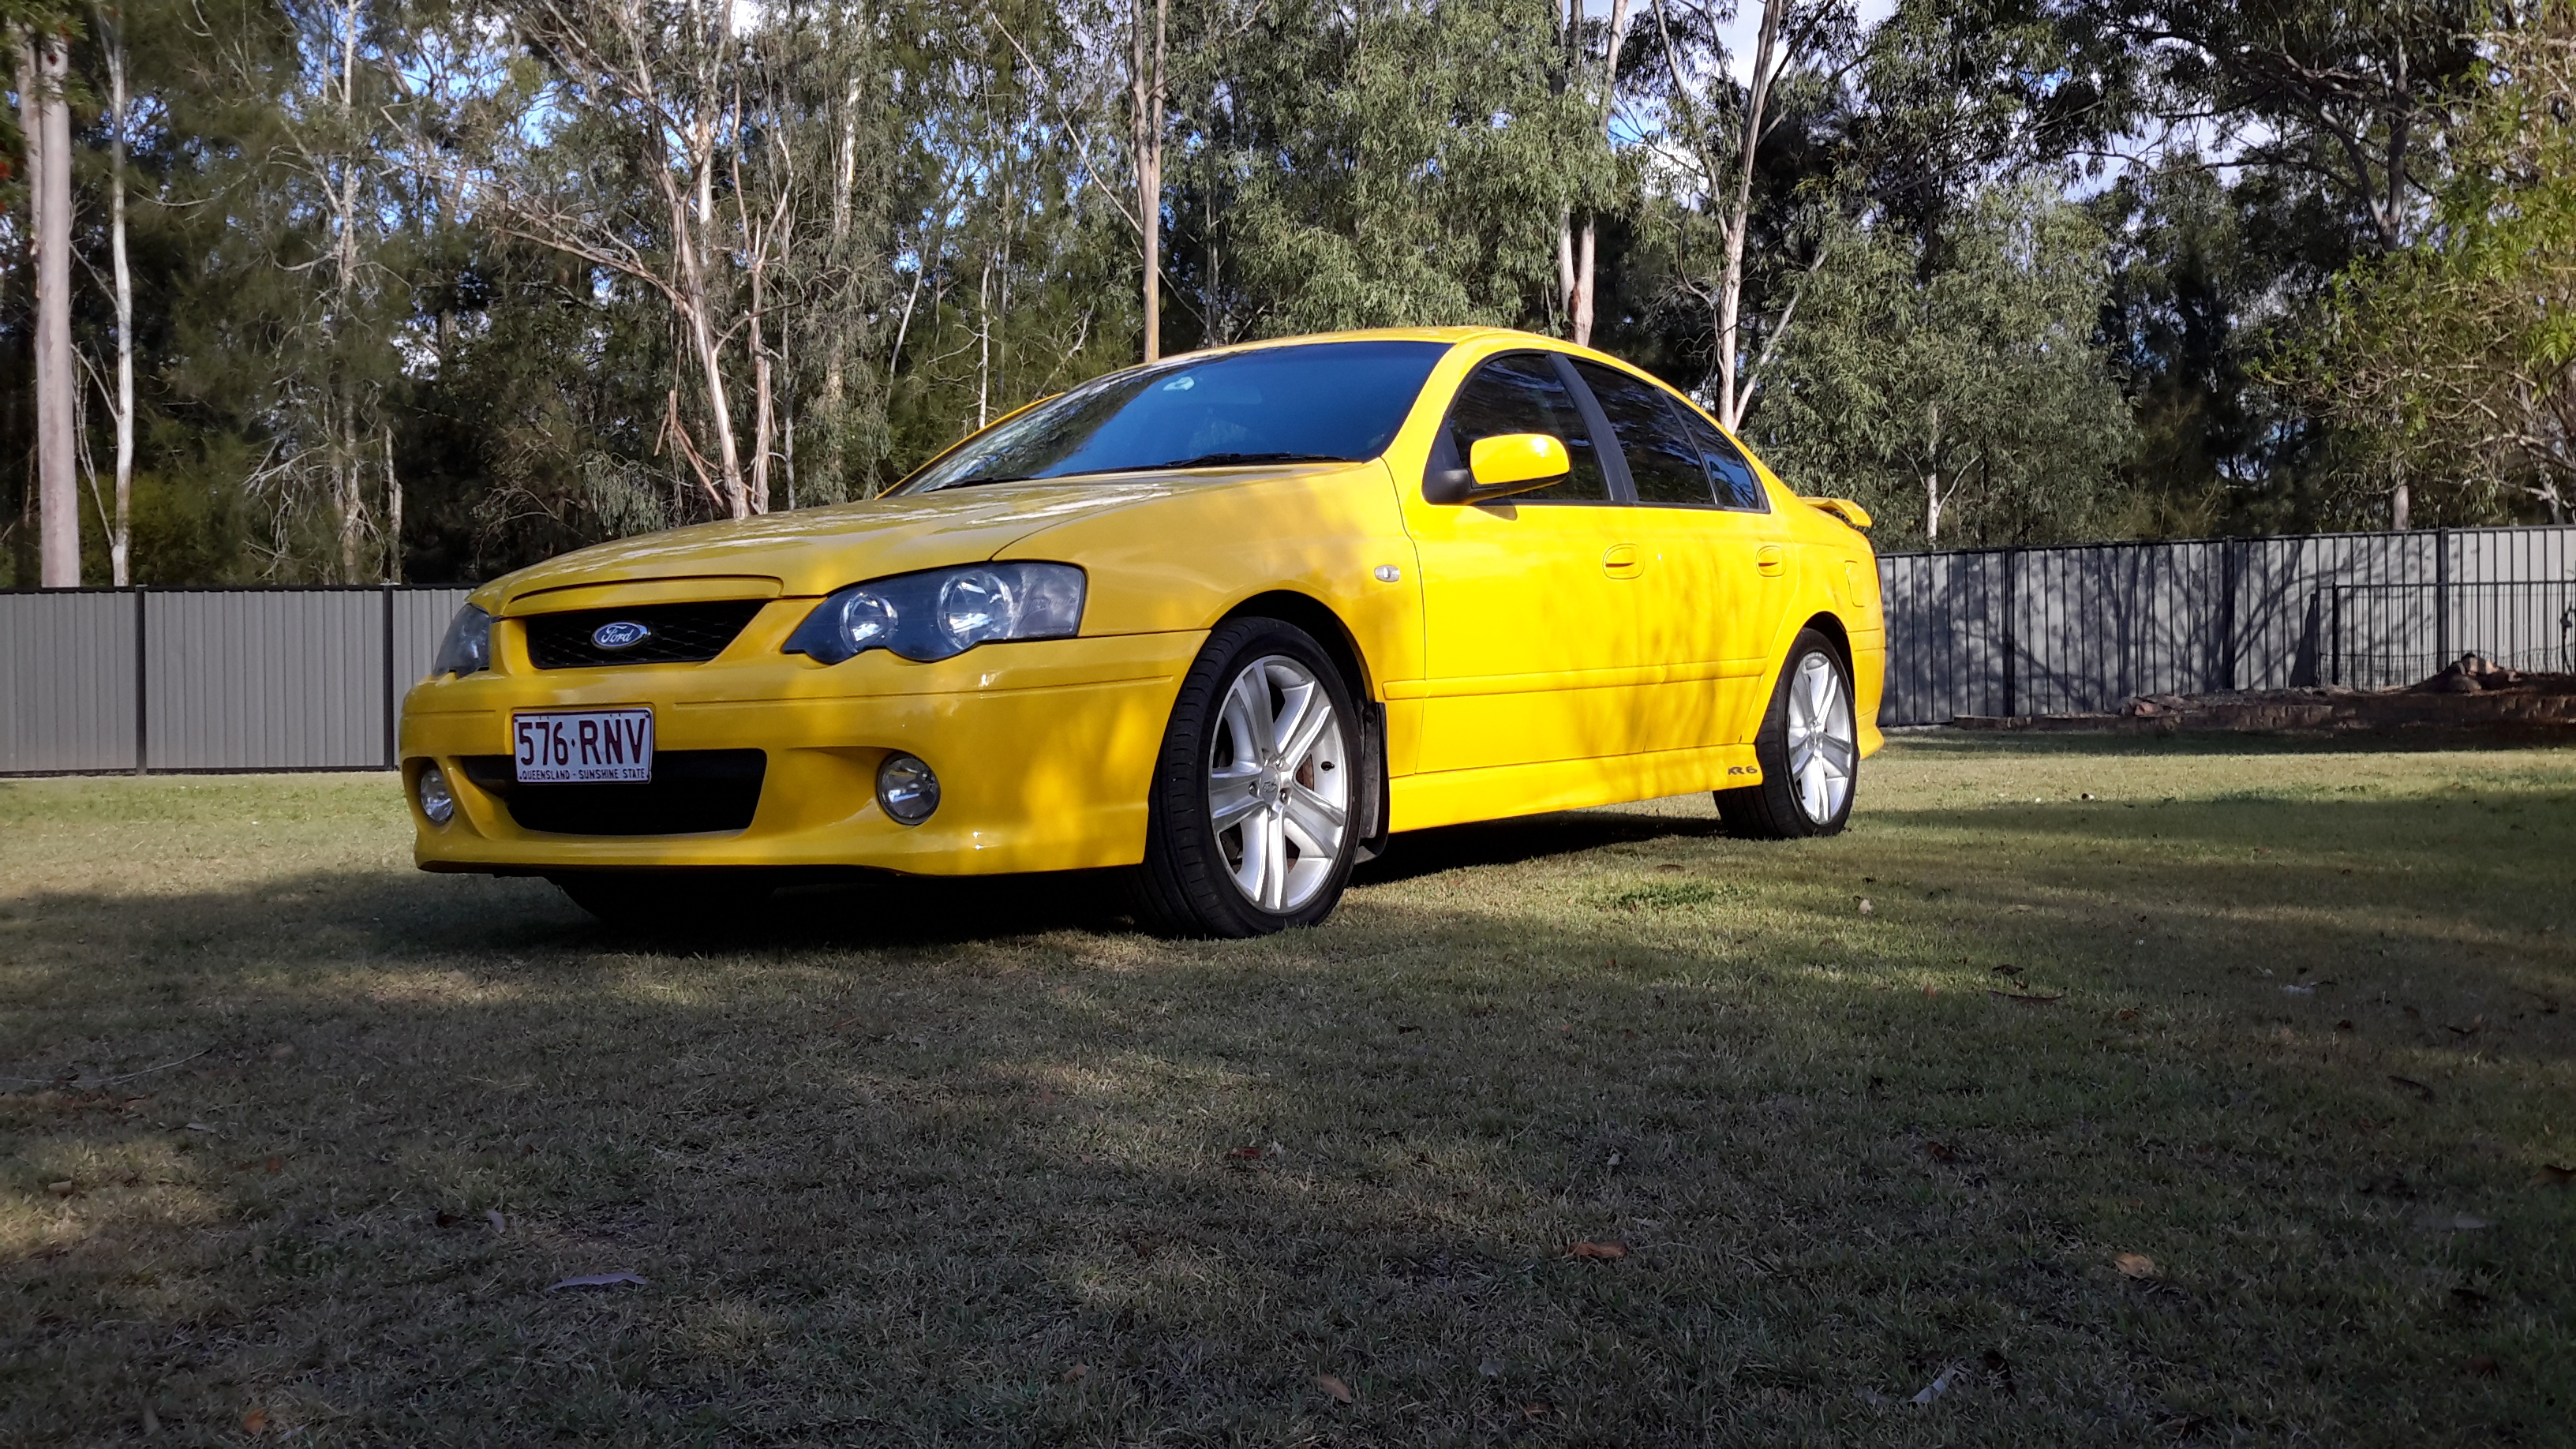 Ford falcon xr6 ba mkii review #4